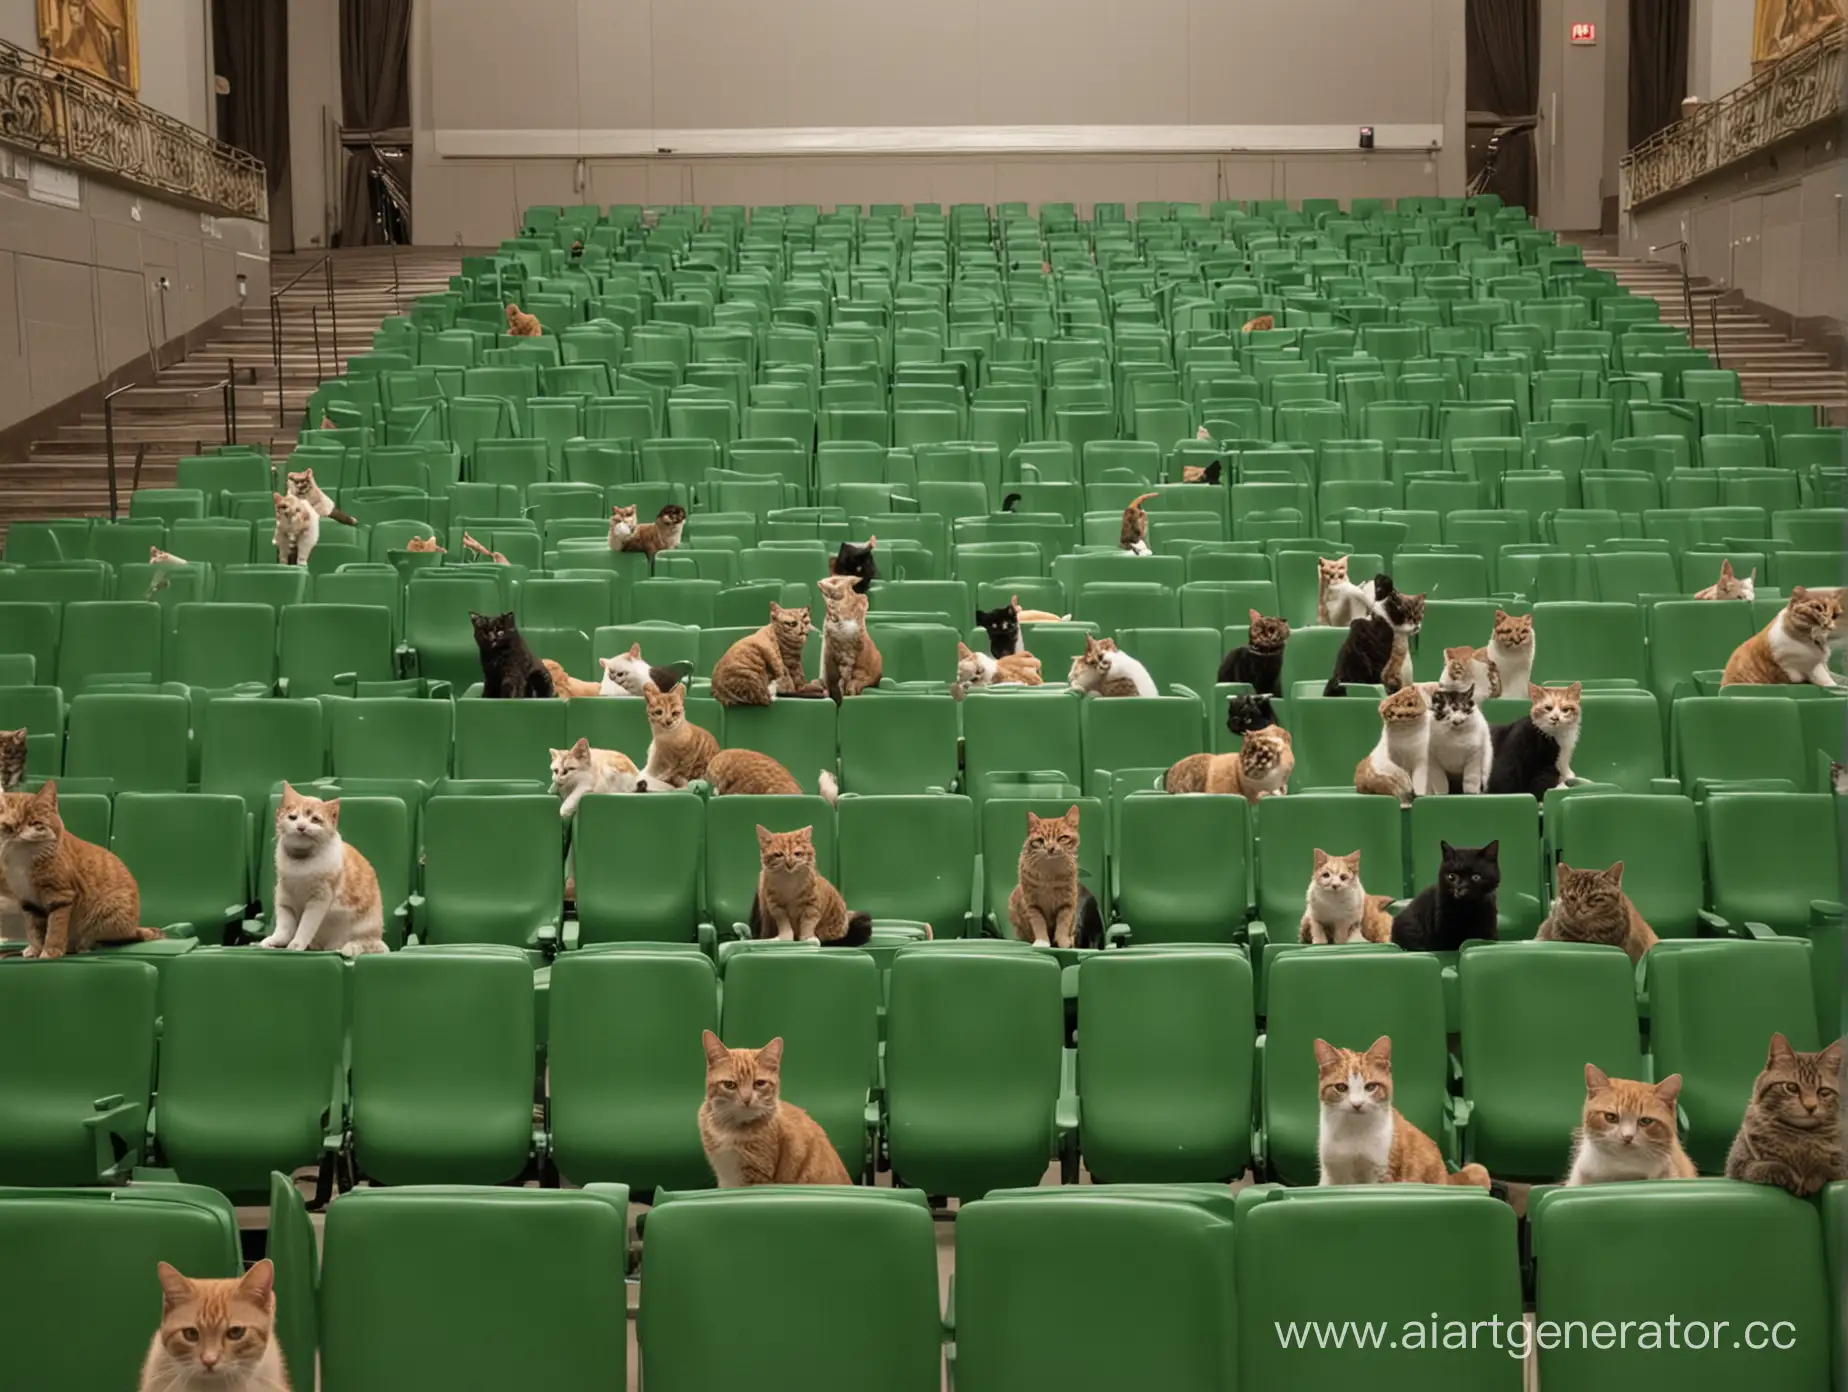 Feline-Symphony-Cats-Filling-a-Concert-Hall-with-Green-Chairs